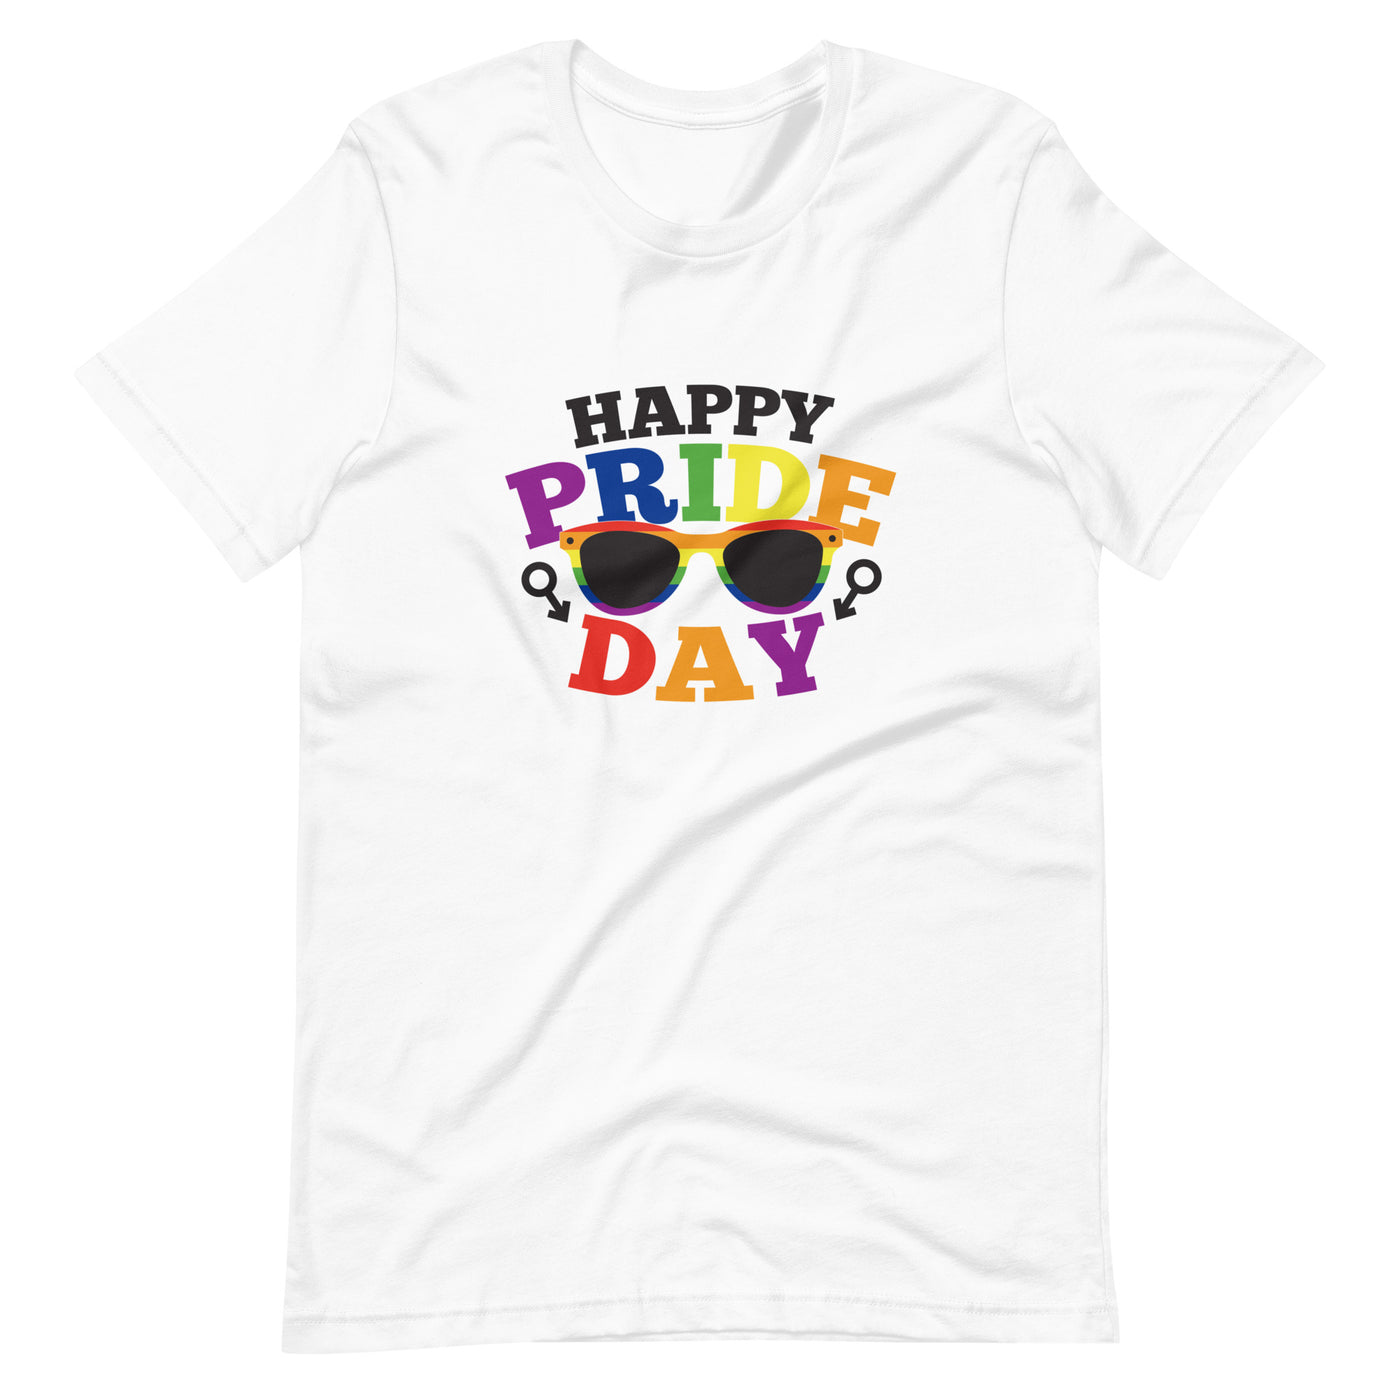 Pride Clothes - Cool as Every Shade of Color Happy Pride Day T-Shirt - White